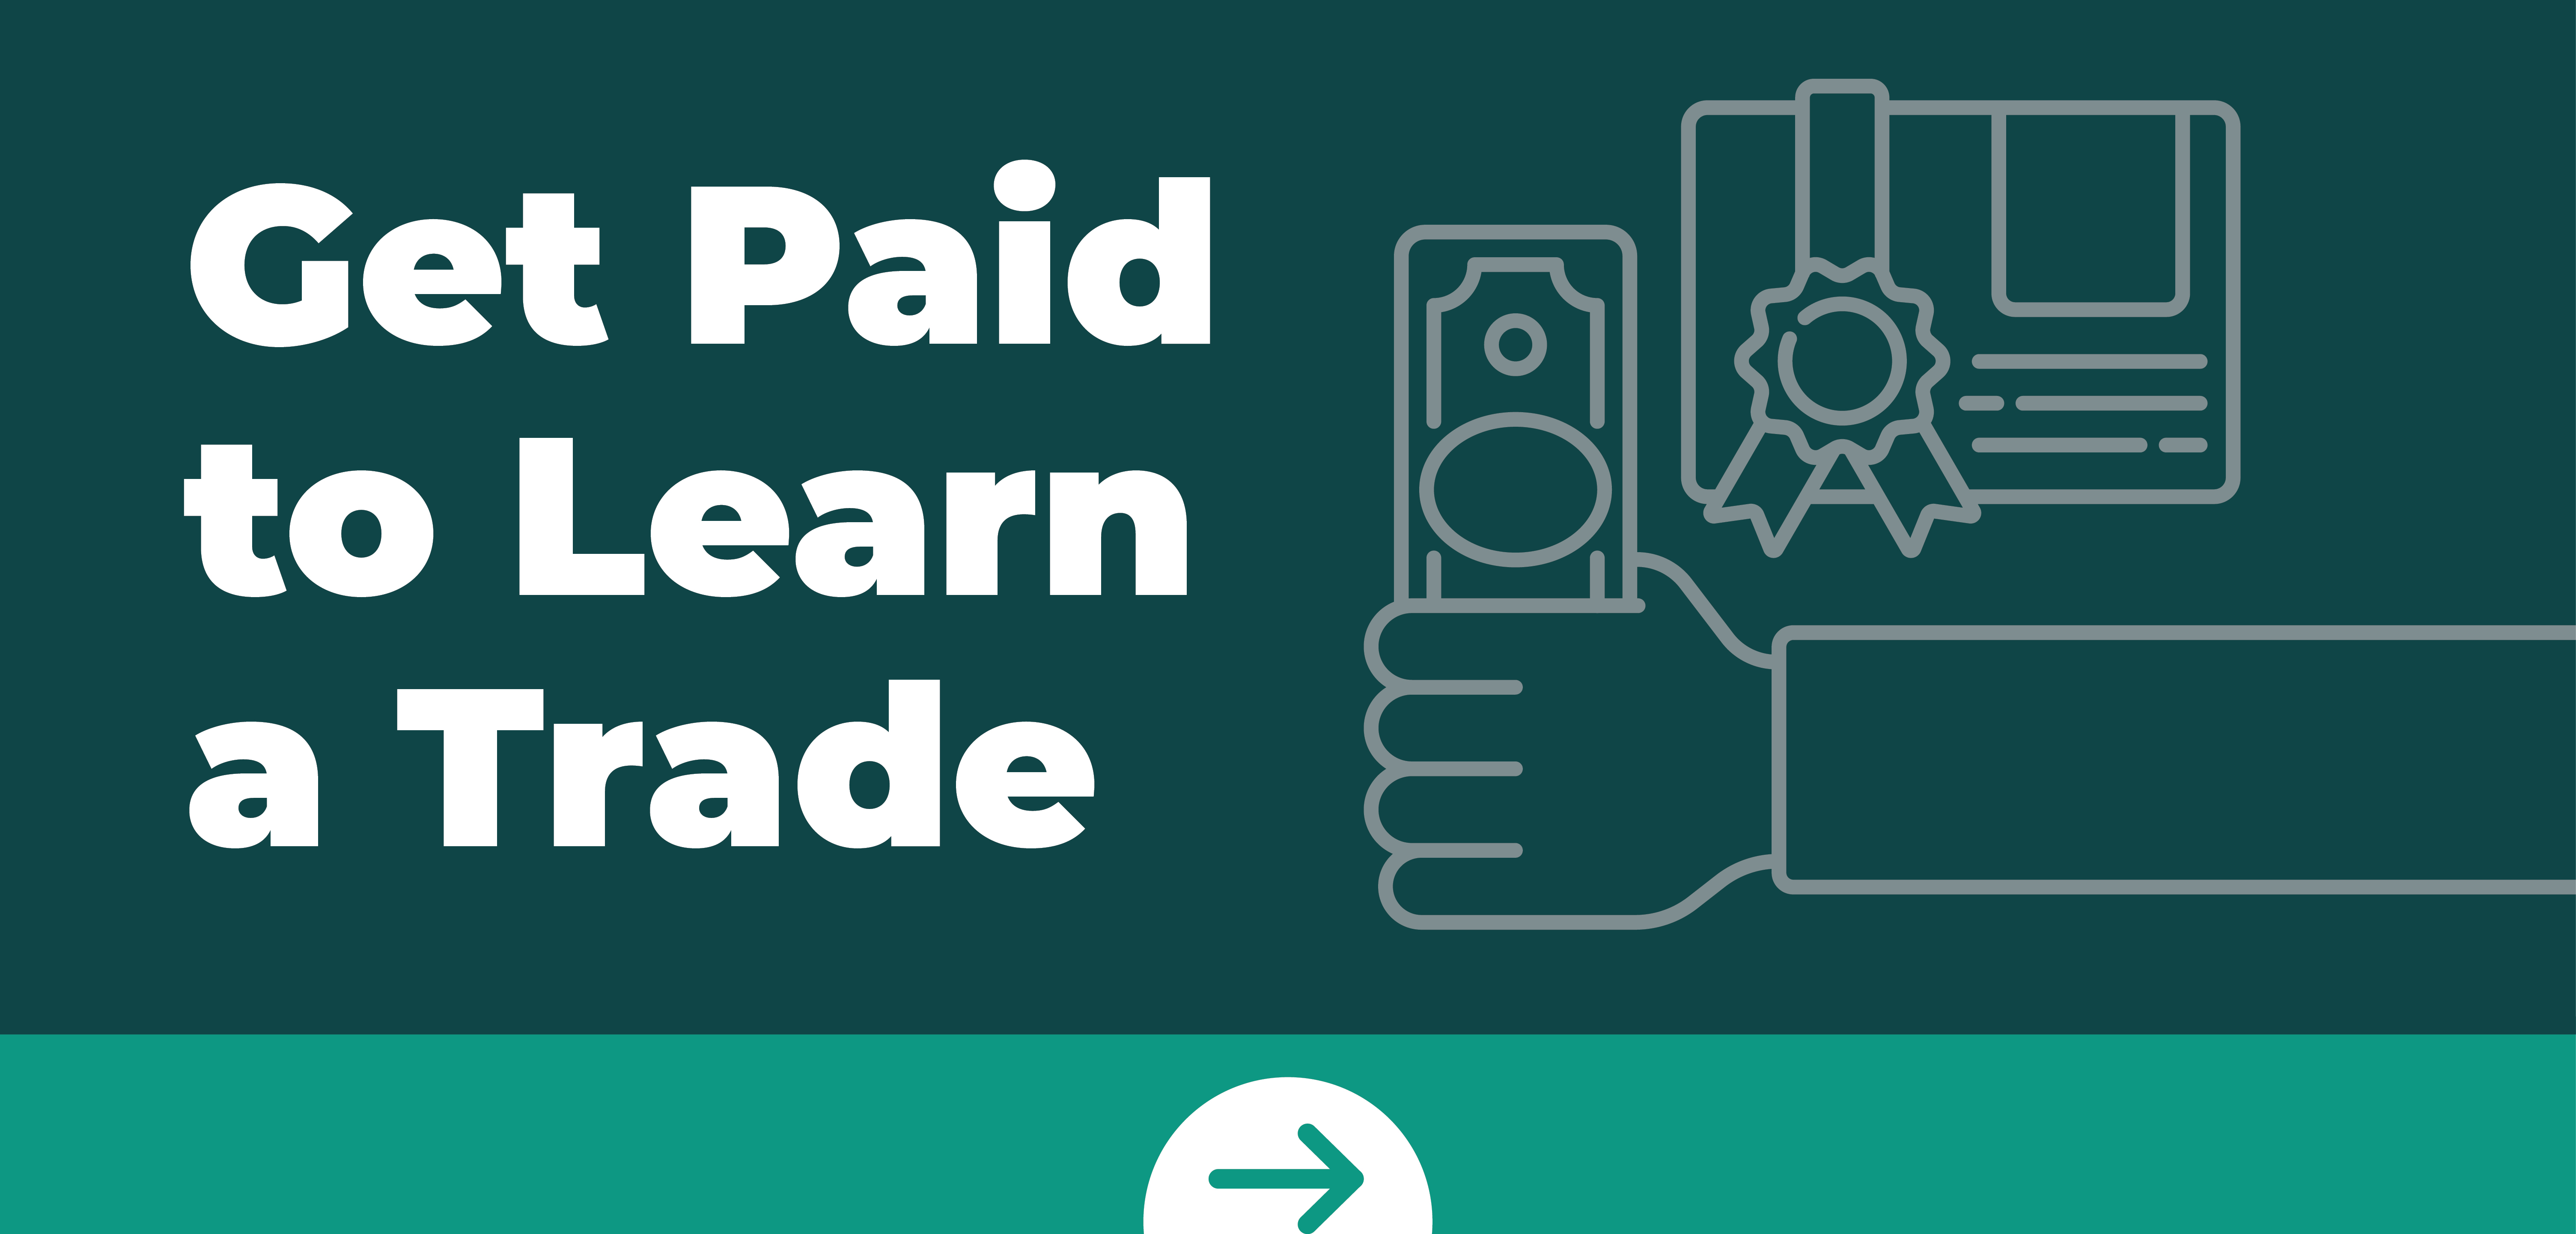 Get Paid to Learn a Trade